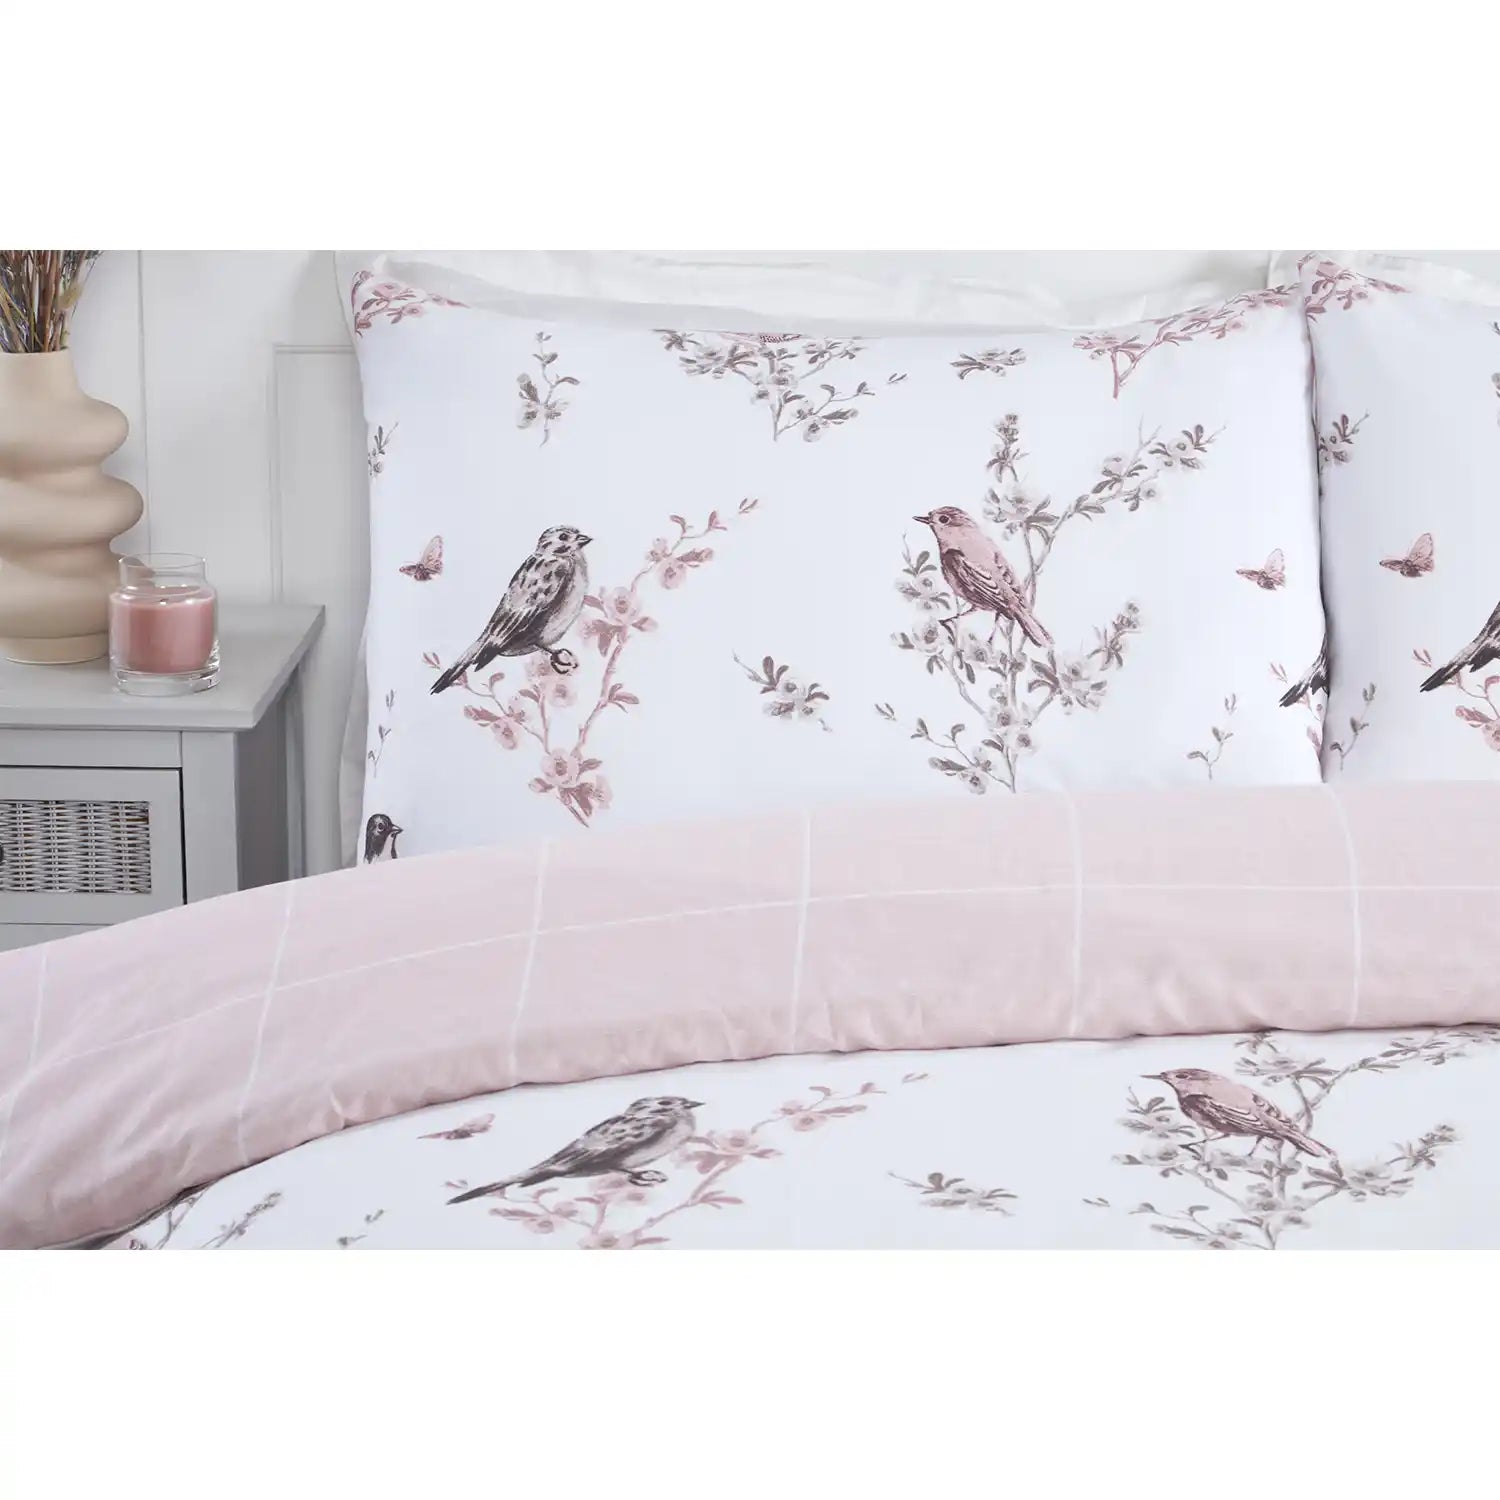  The Home Collection Vintage Toile Duvet Cover Set 1 Shaws Department Stores